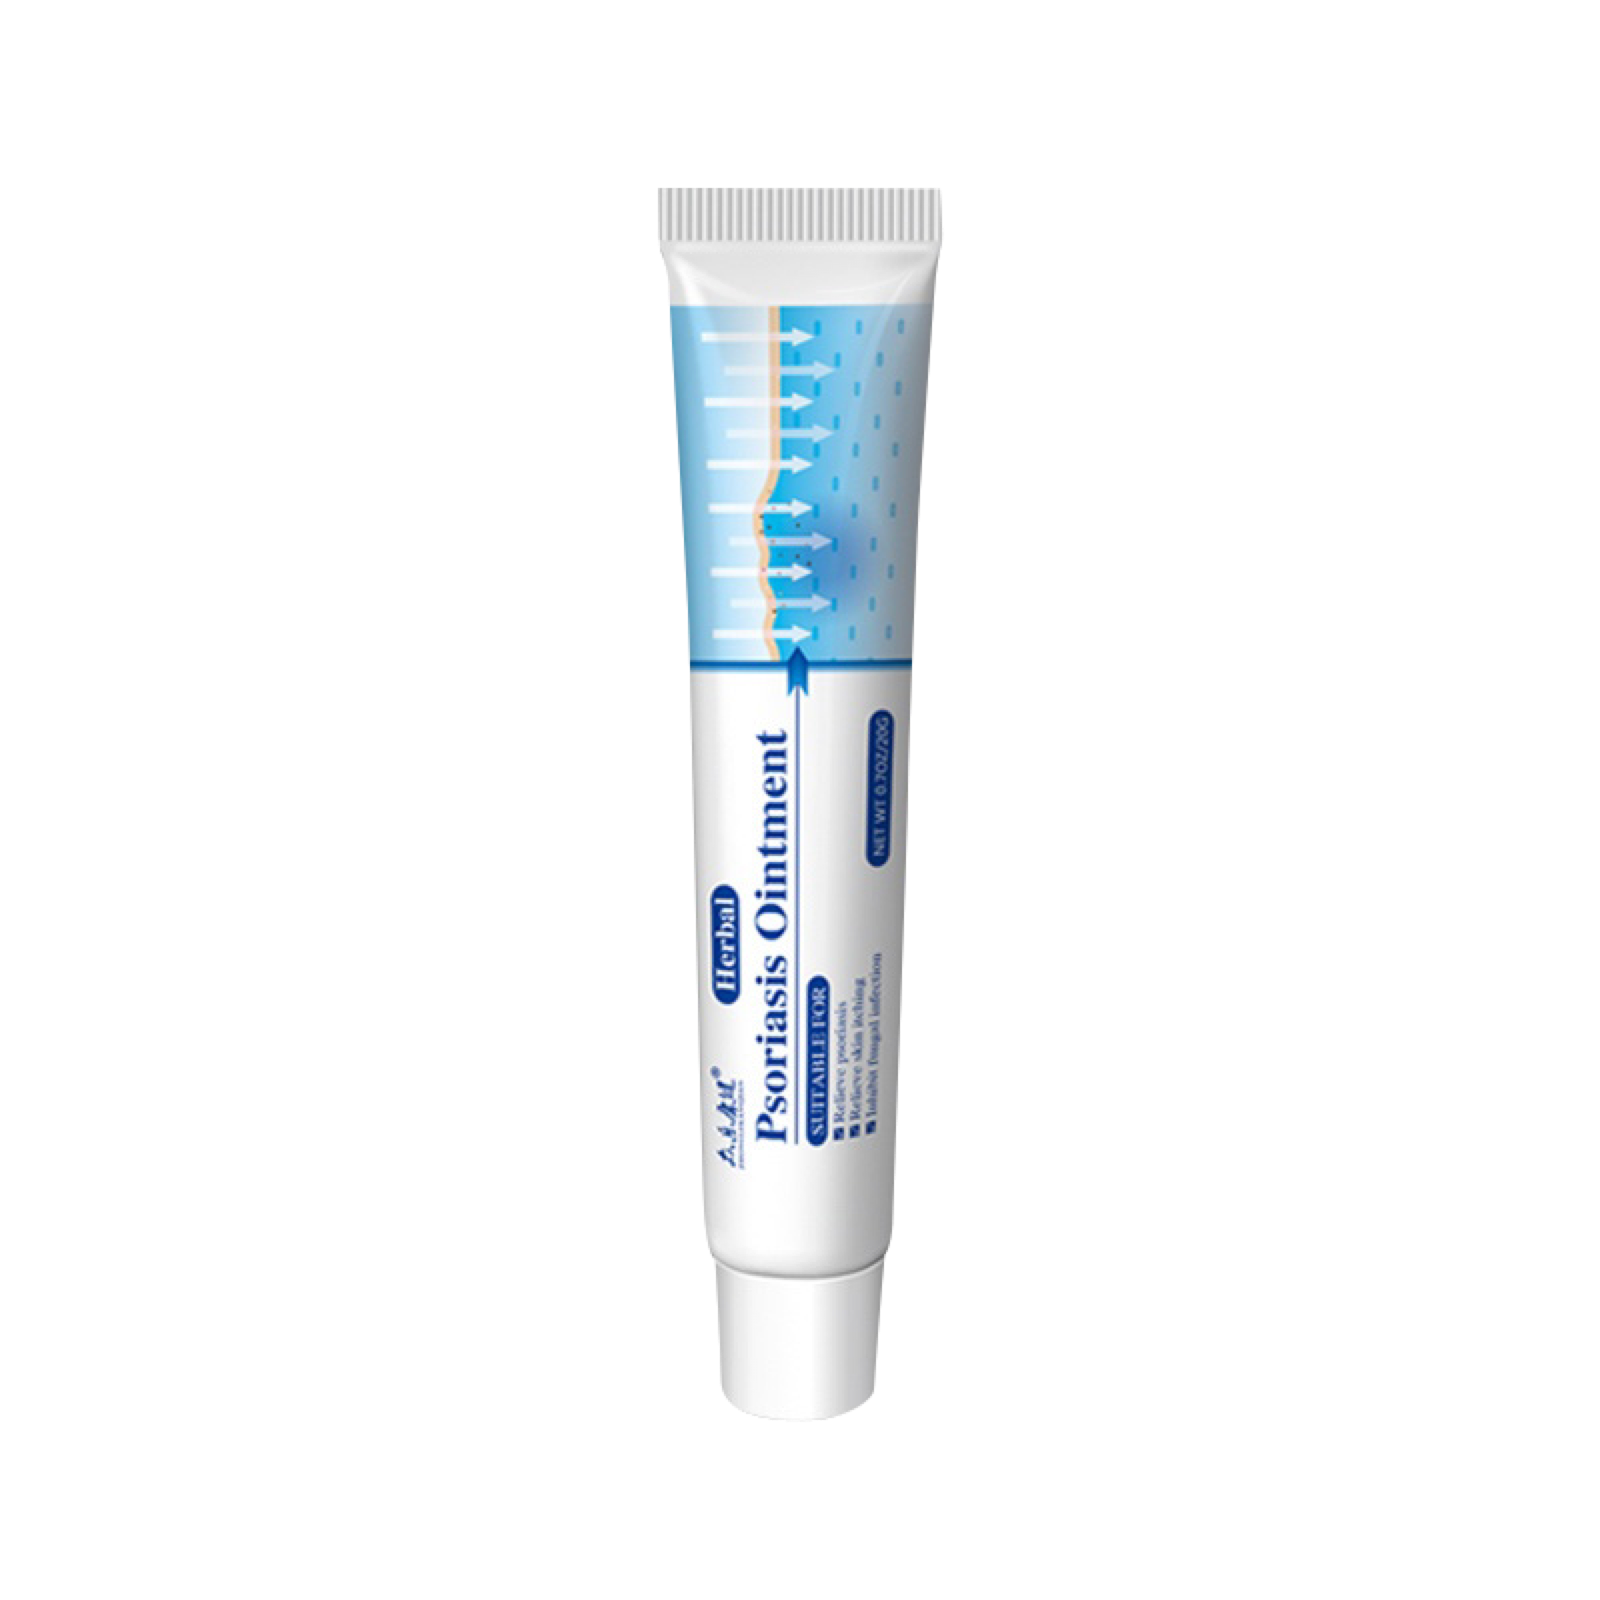 Psoriasis Ointment - Limited Time Special Offer!